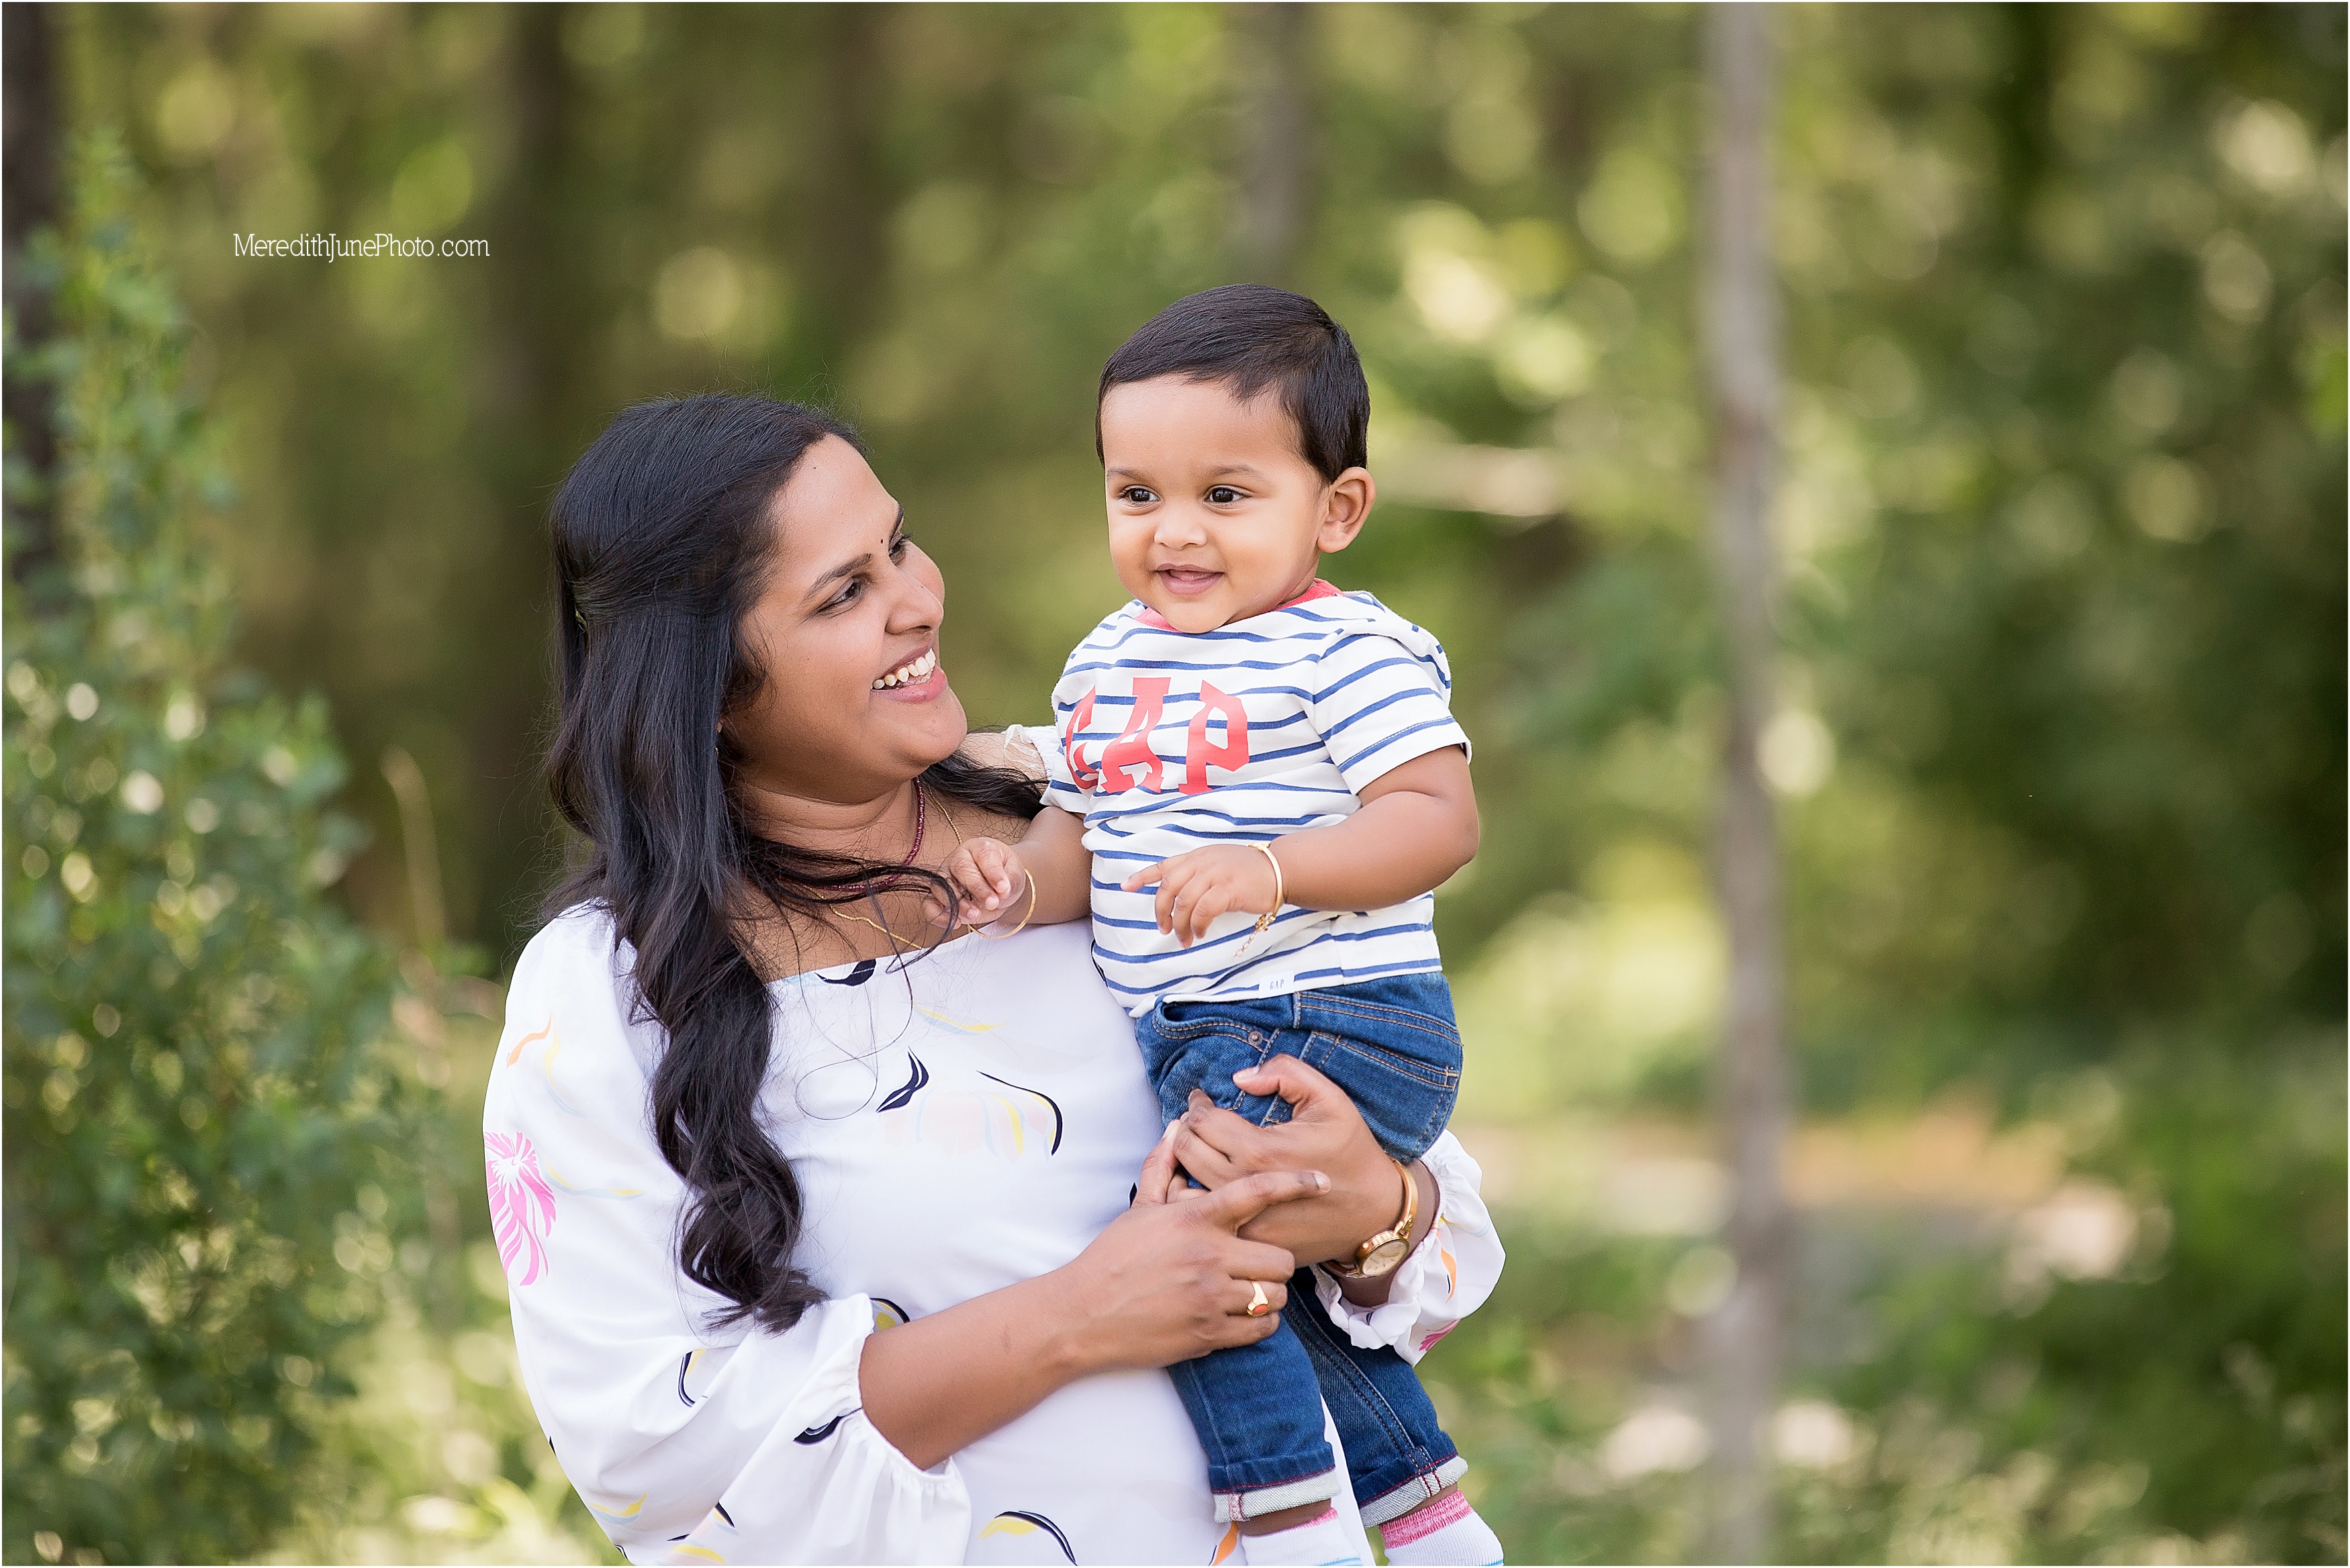 Arjun turns one at Meredith June Photography